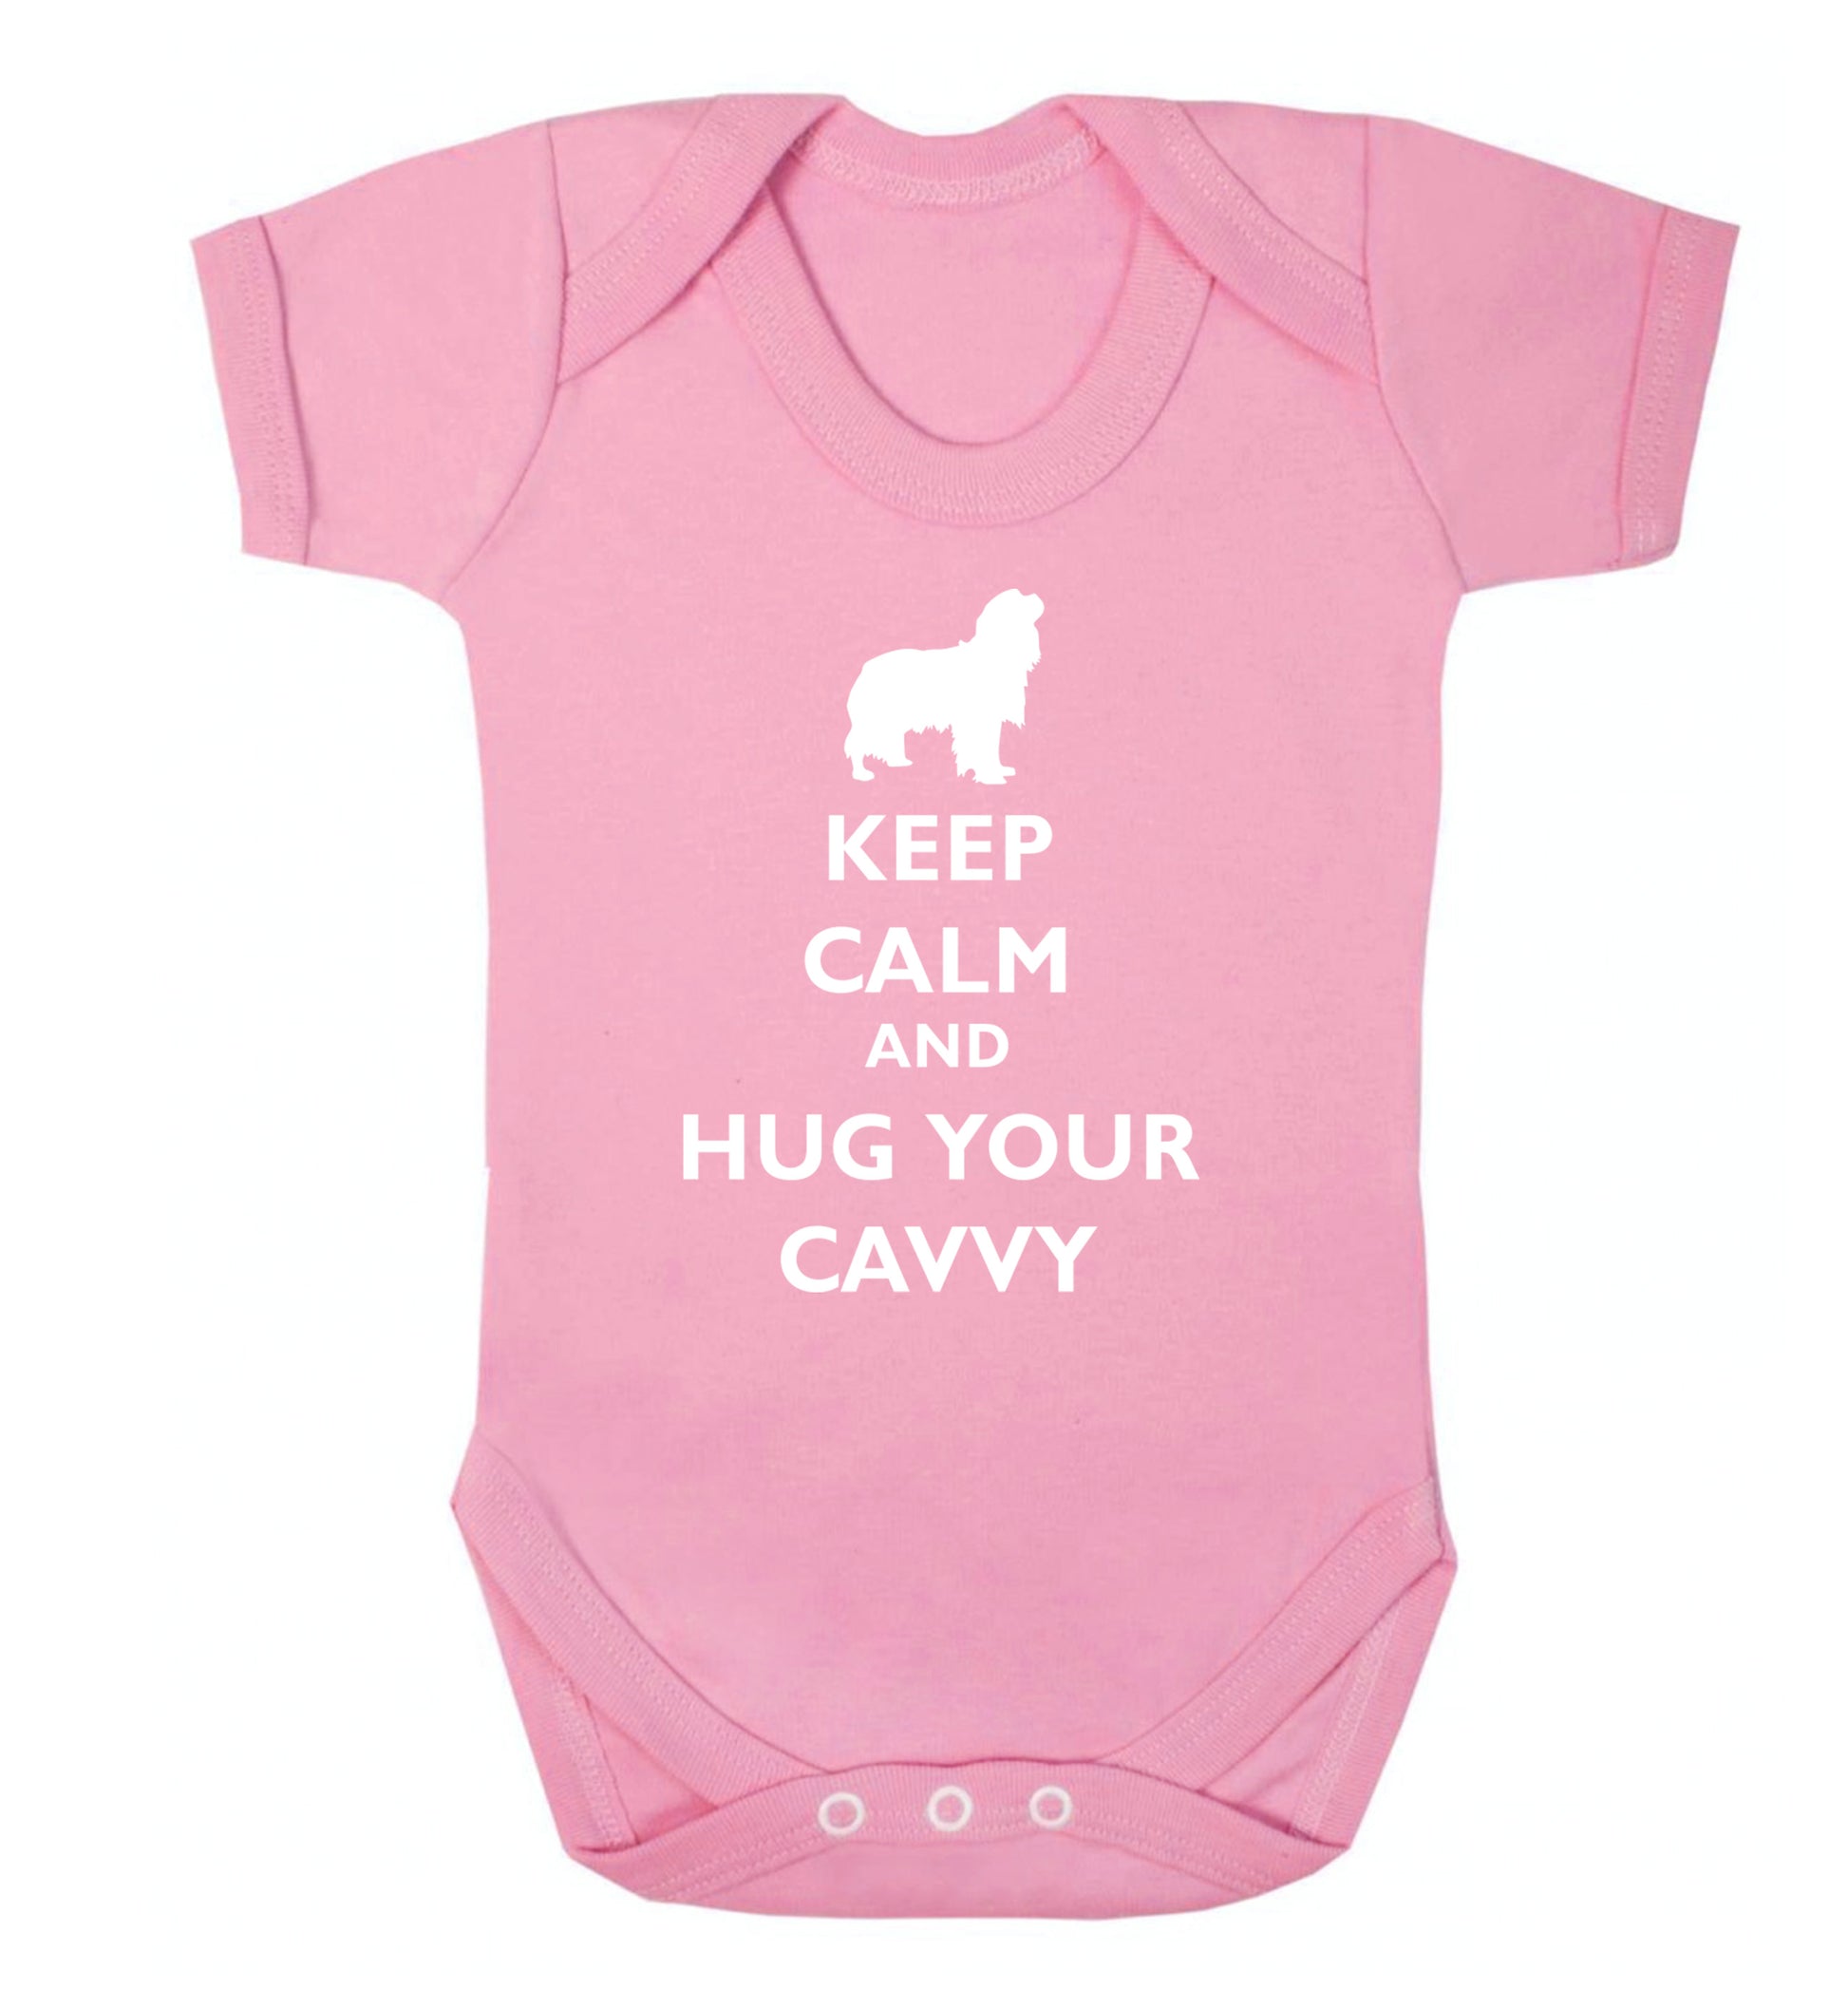 Keep calm and hug your cavvy Baby Vest pale pink 18-24 months